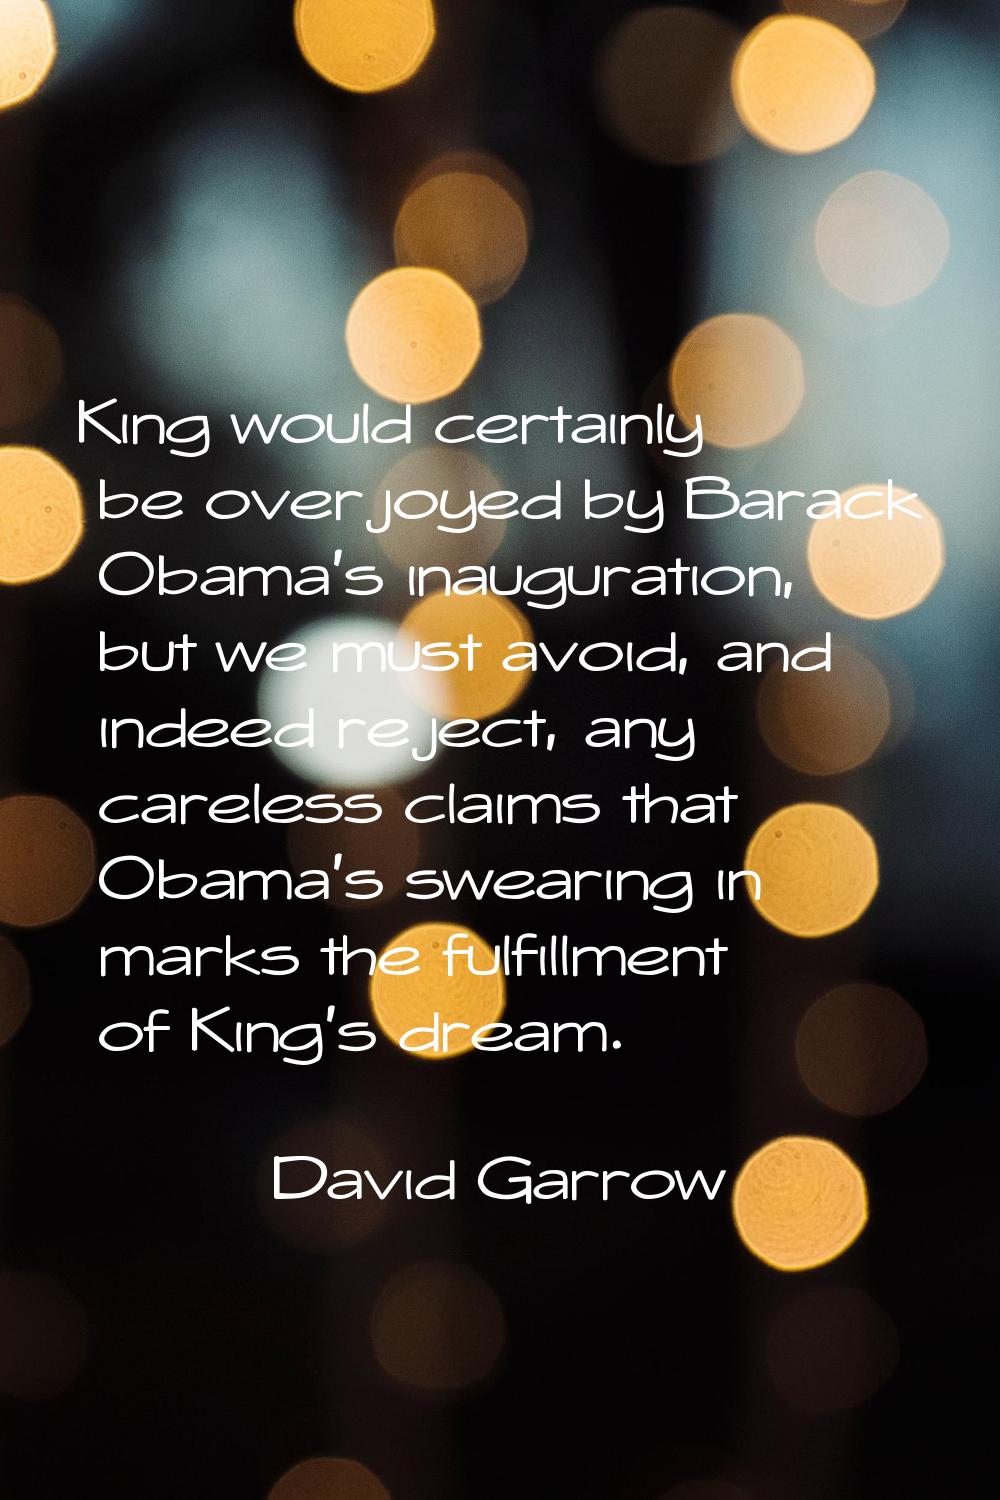 King would certainly be overjoyed by Barack Obama's inauguration, but we must avoid, and indeed rej